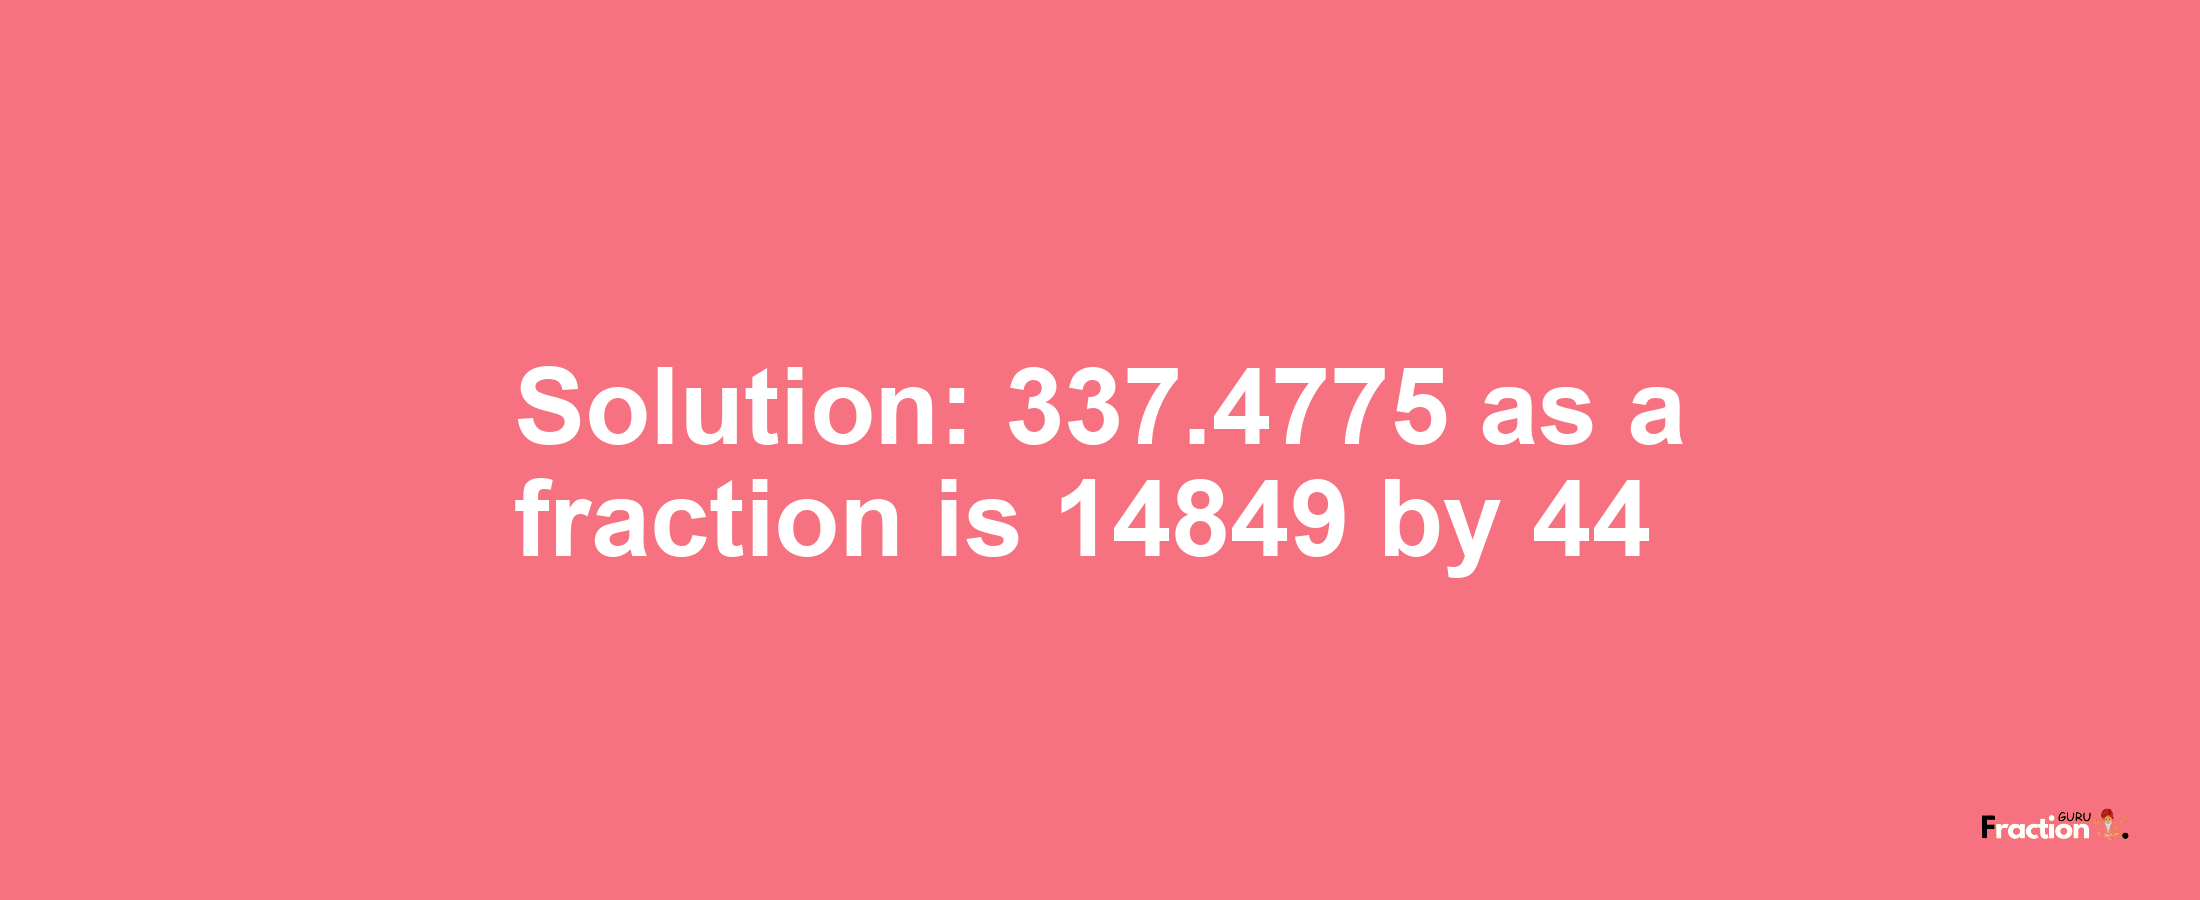 Solution:337.4775 as a fraction is 14849/44